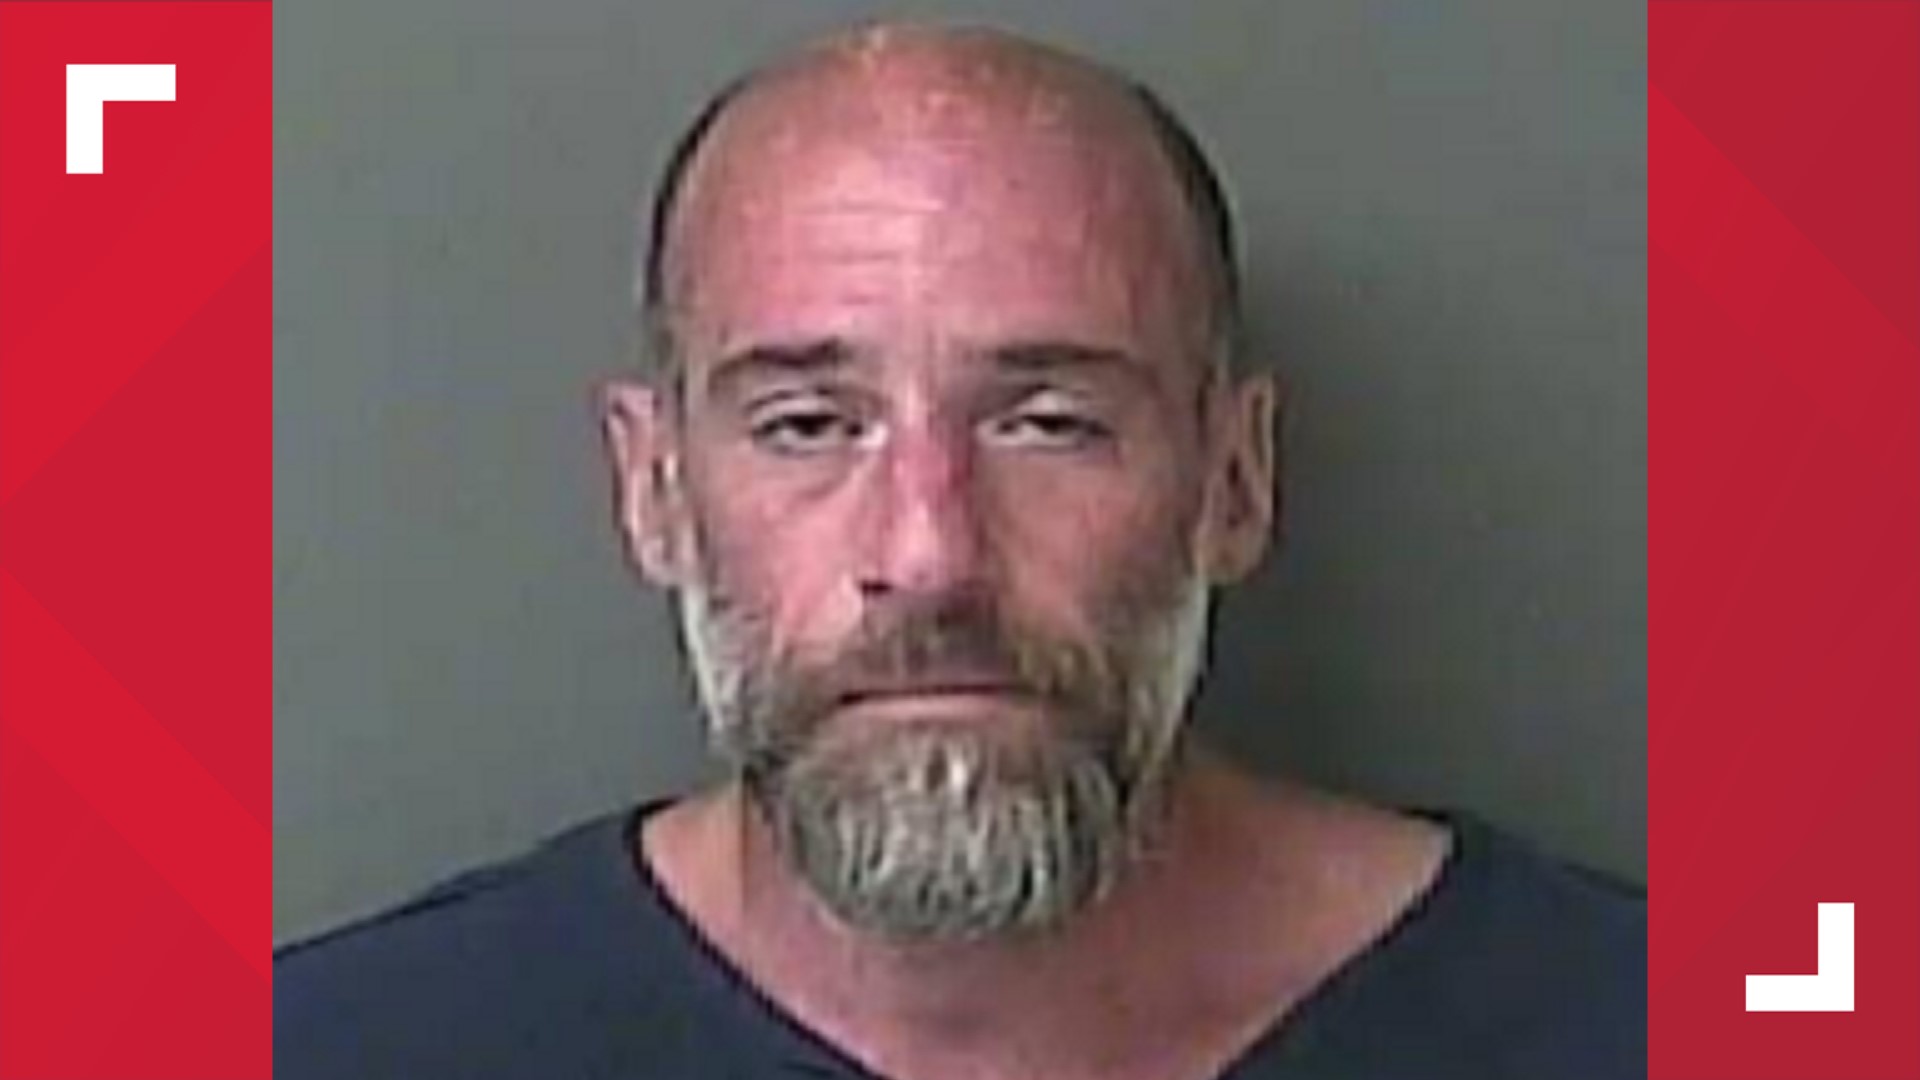 Deputies are looking for Curtis L. Freeman, 44, as a person of interest in a Christmas afternoon house fire in Kokomo.